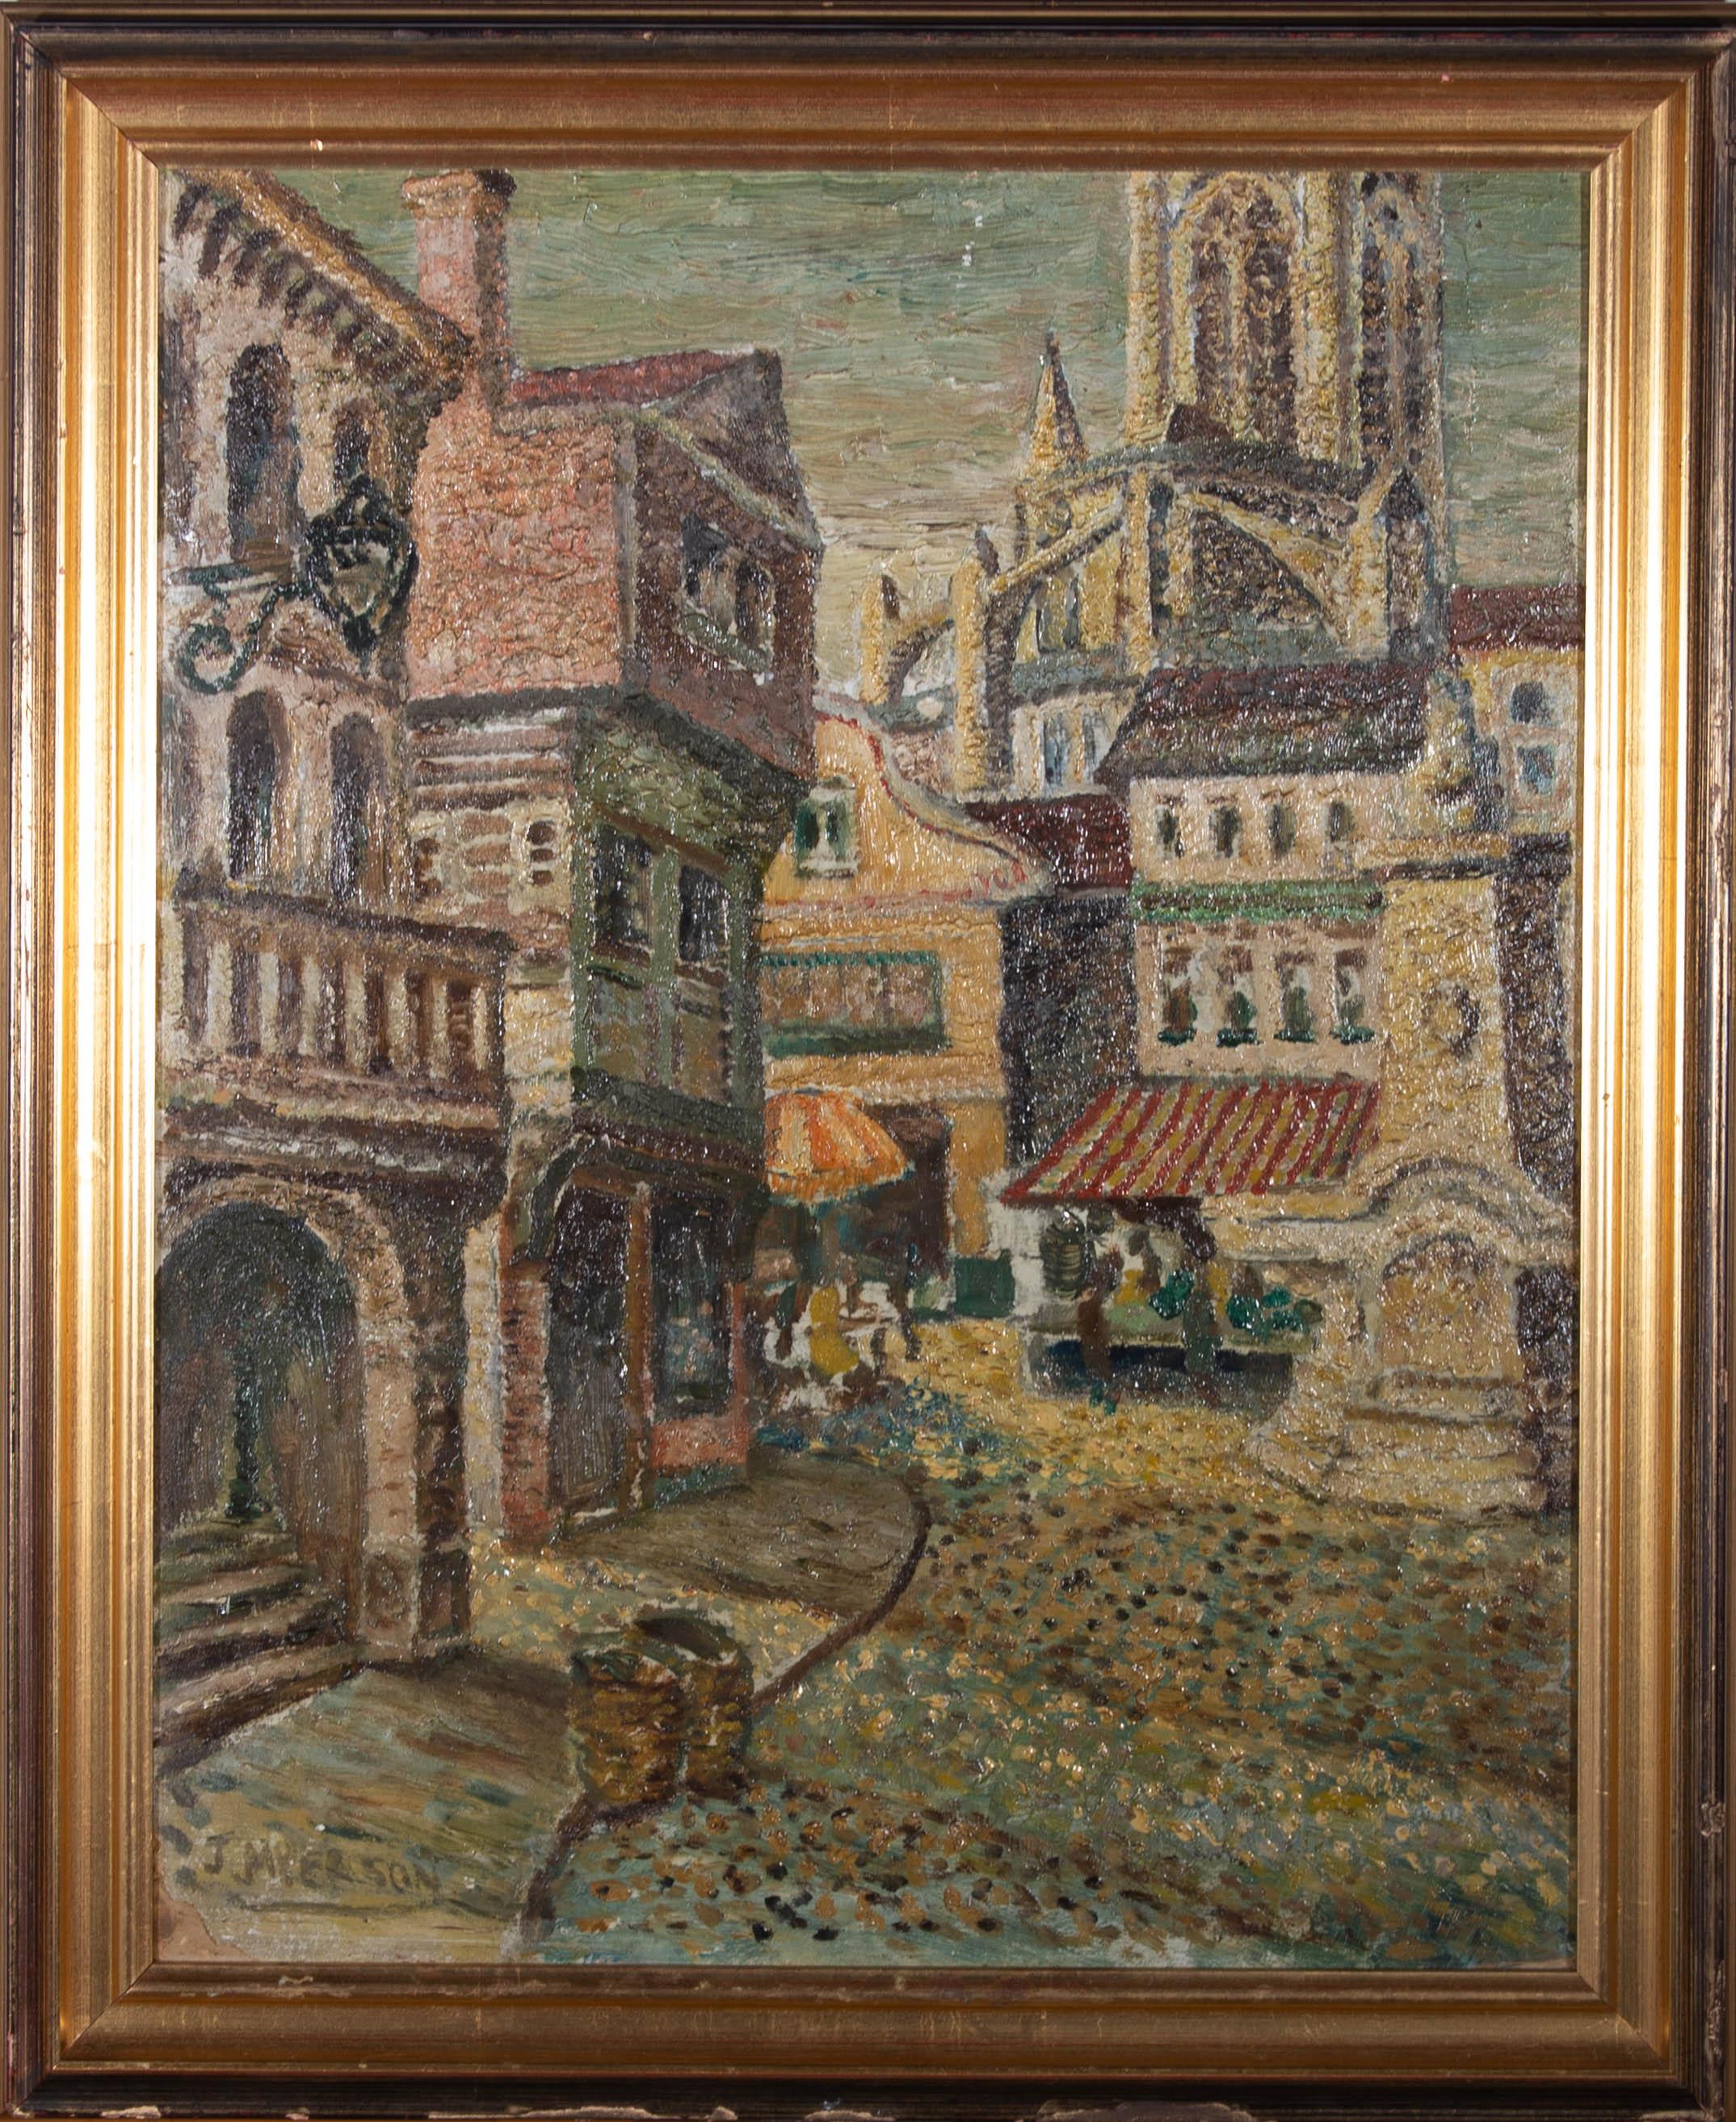 A thoroughly charming impressionistic street scene in an effective impasto style. The artist has used a pleasantly naive style to illustrate the simple architecture of the street shop facades with the grand form of a cathedral with flying buttresses